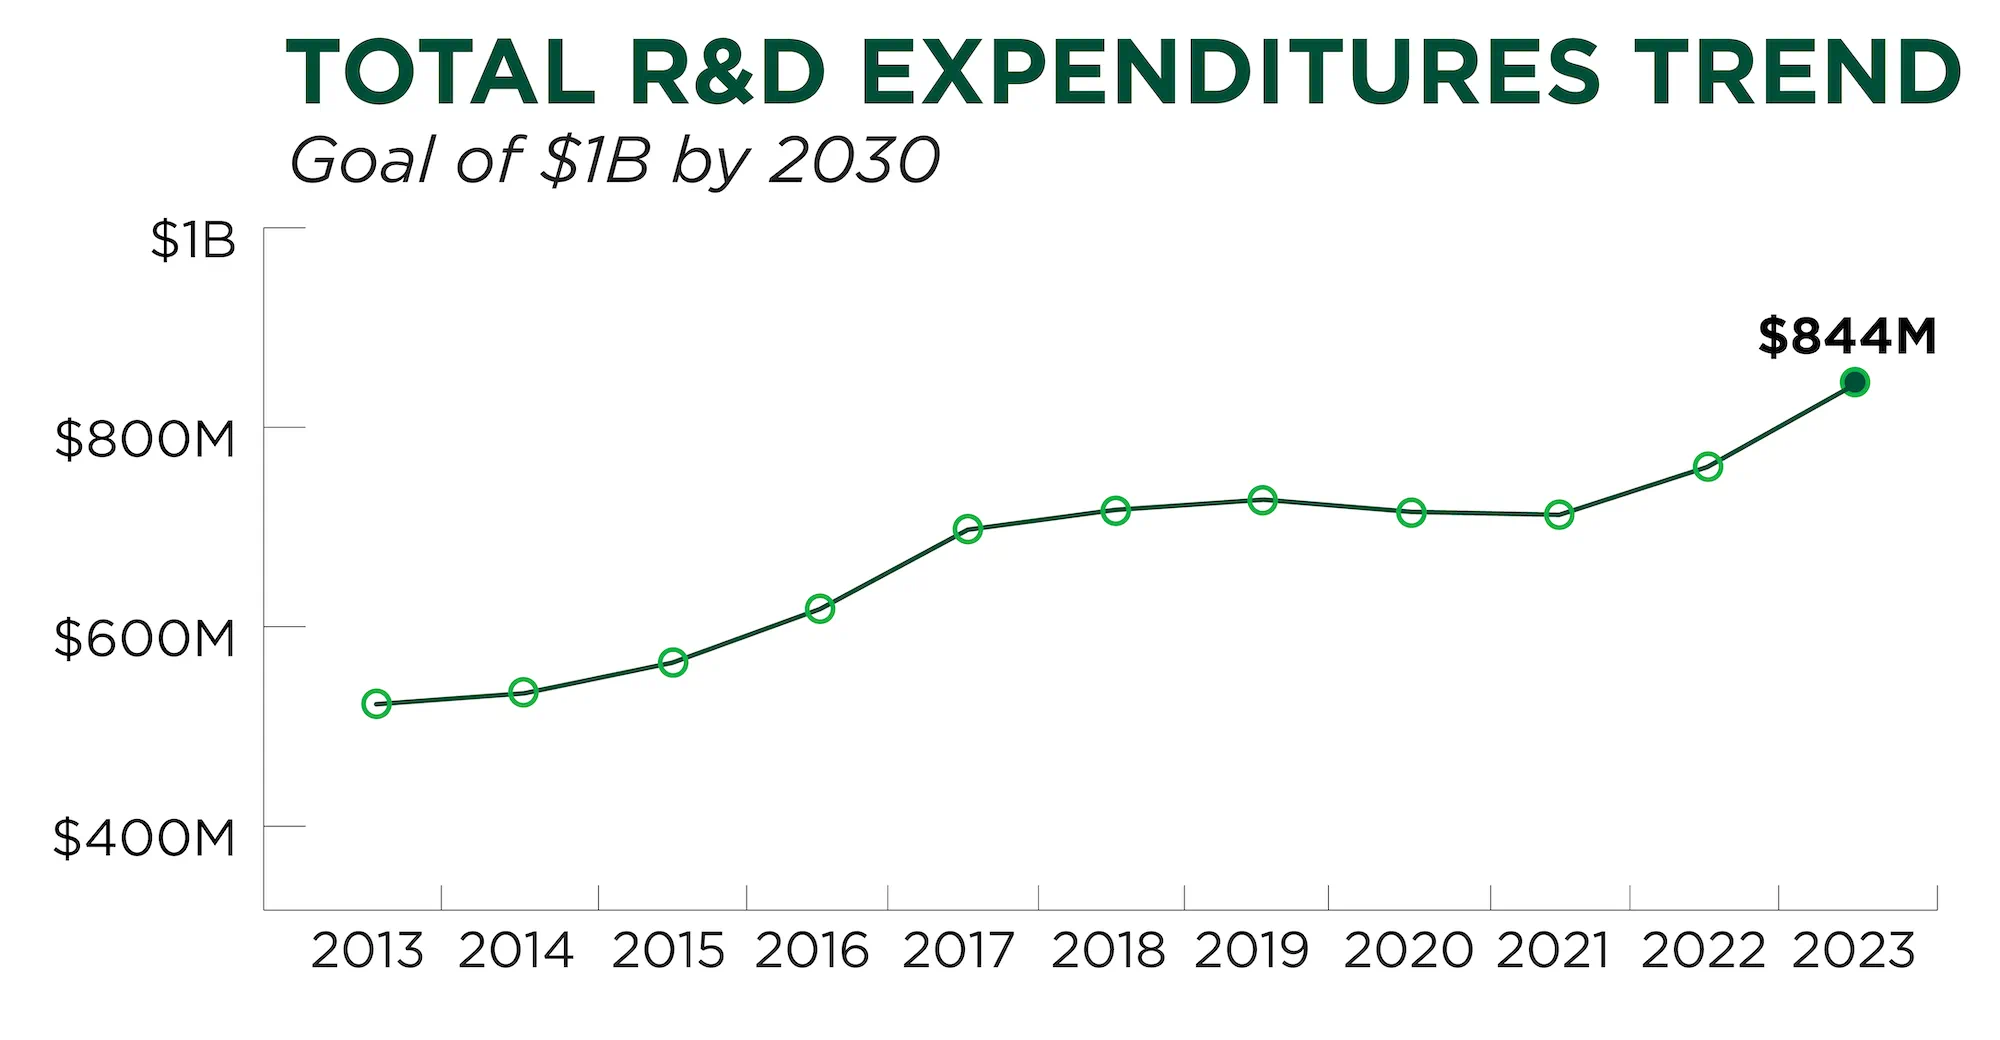 A chart that says Total R&D expenditures trend, goal of $1B by 2023. There is a dotted line that shows an increase in 2024 and a bold number that is $844M.